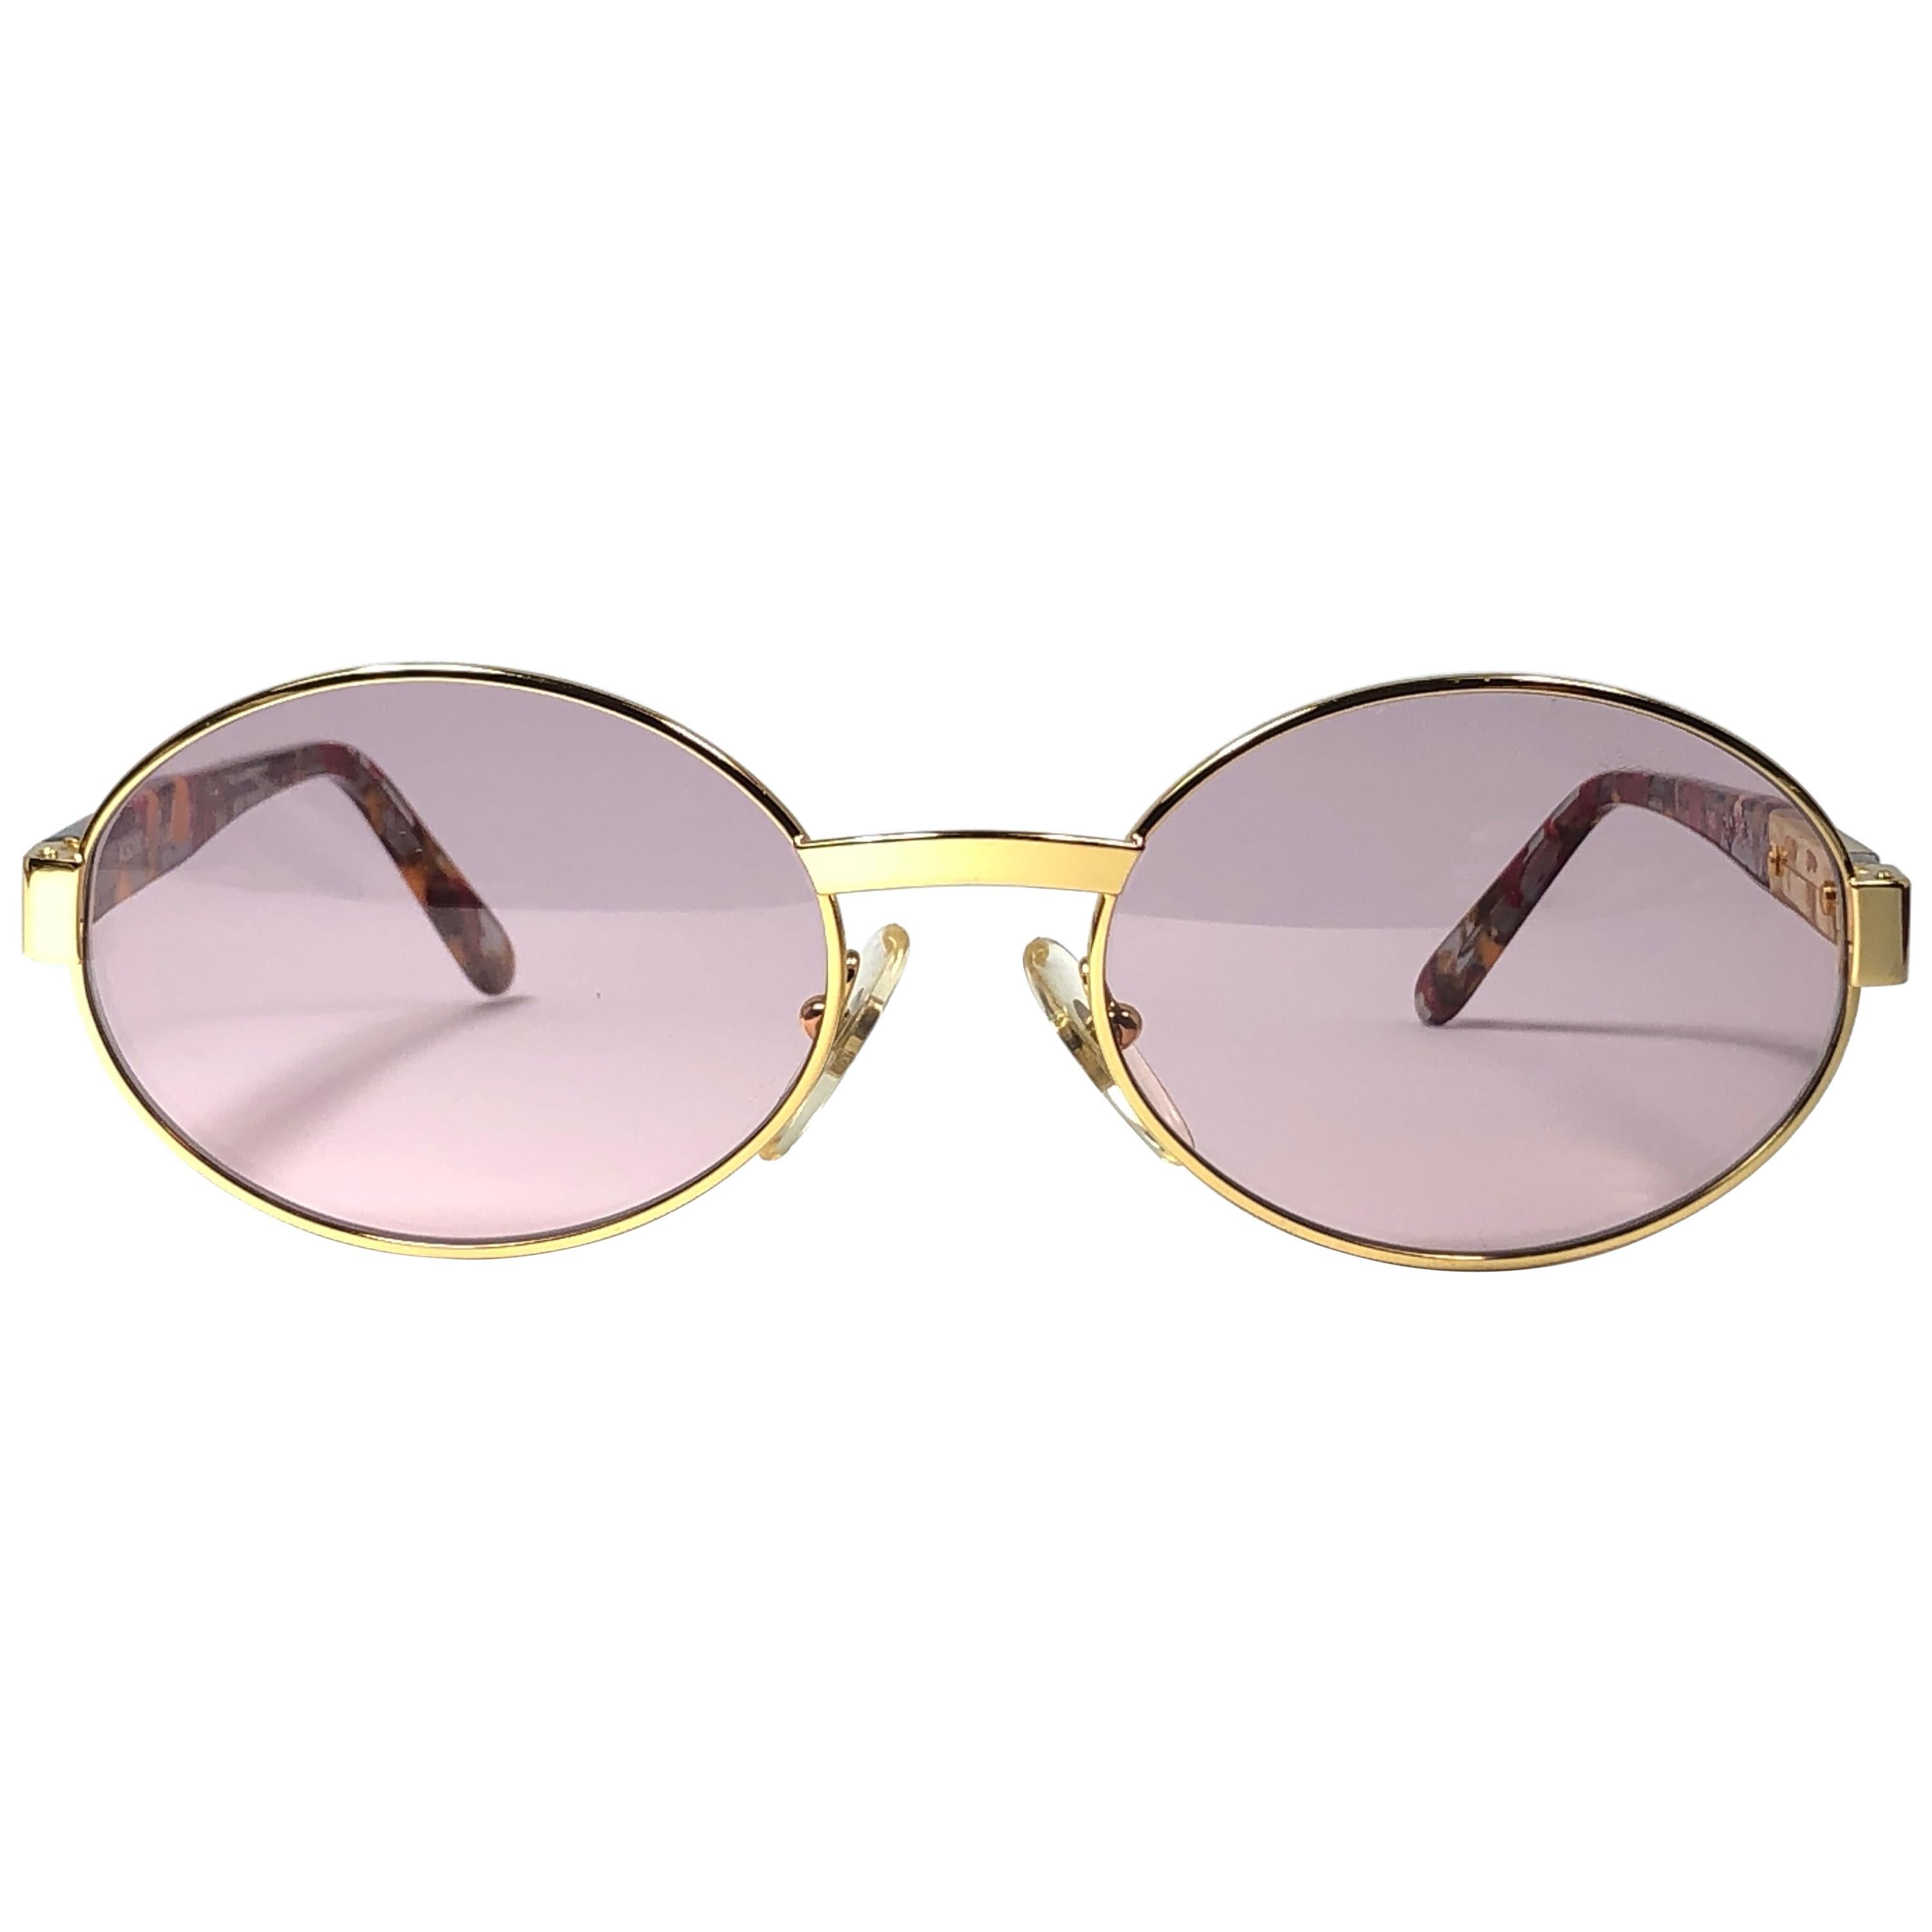 New Vintage Moschino MM10 Medium Round Gold 1990 Sunglasses Made in Italy